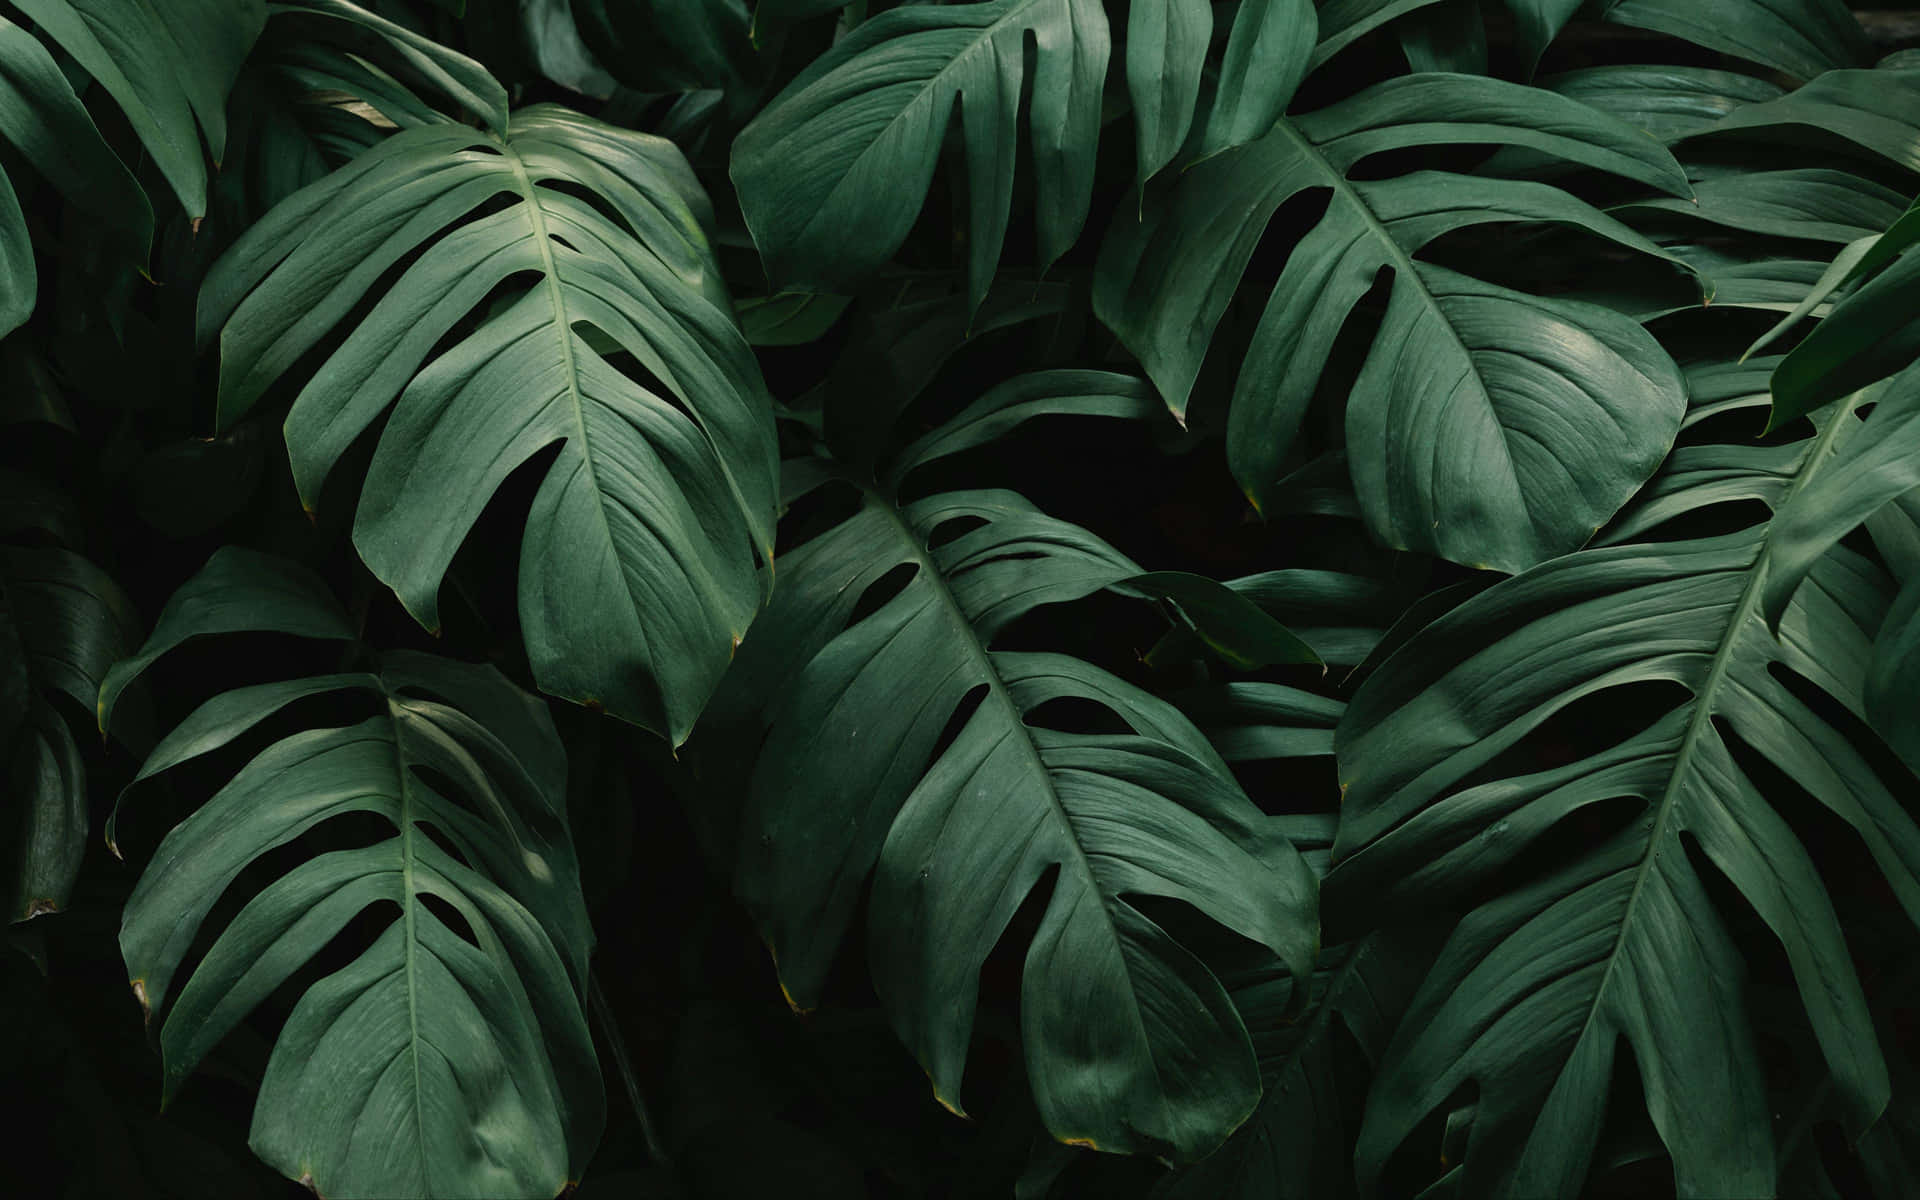 Bring Nature to Your Desktop with this Elegant Plant Aesthetic Wallpaper